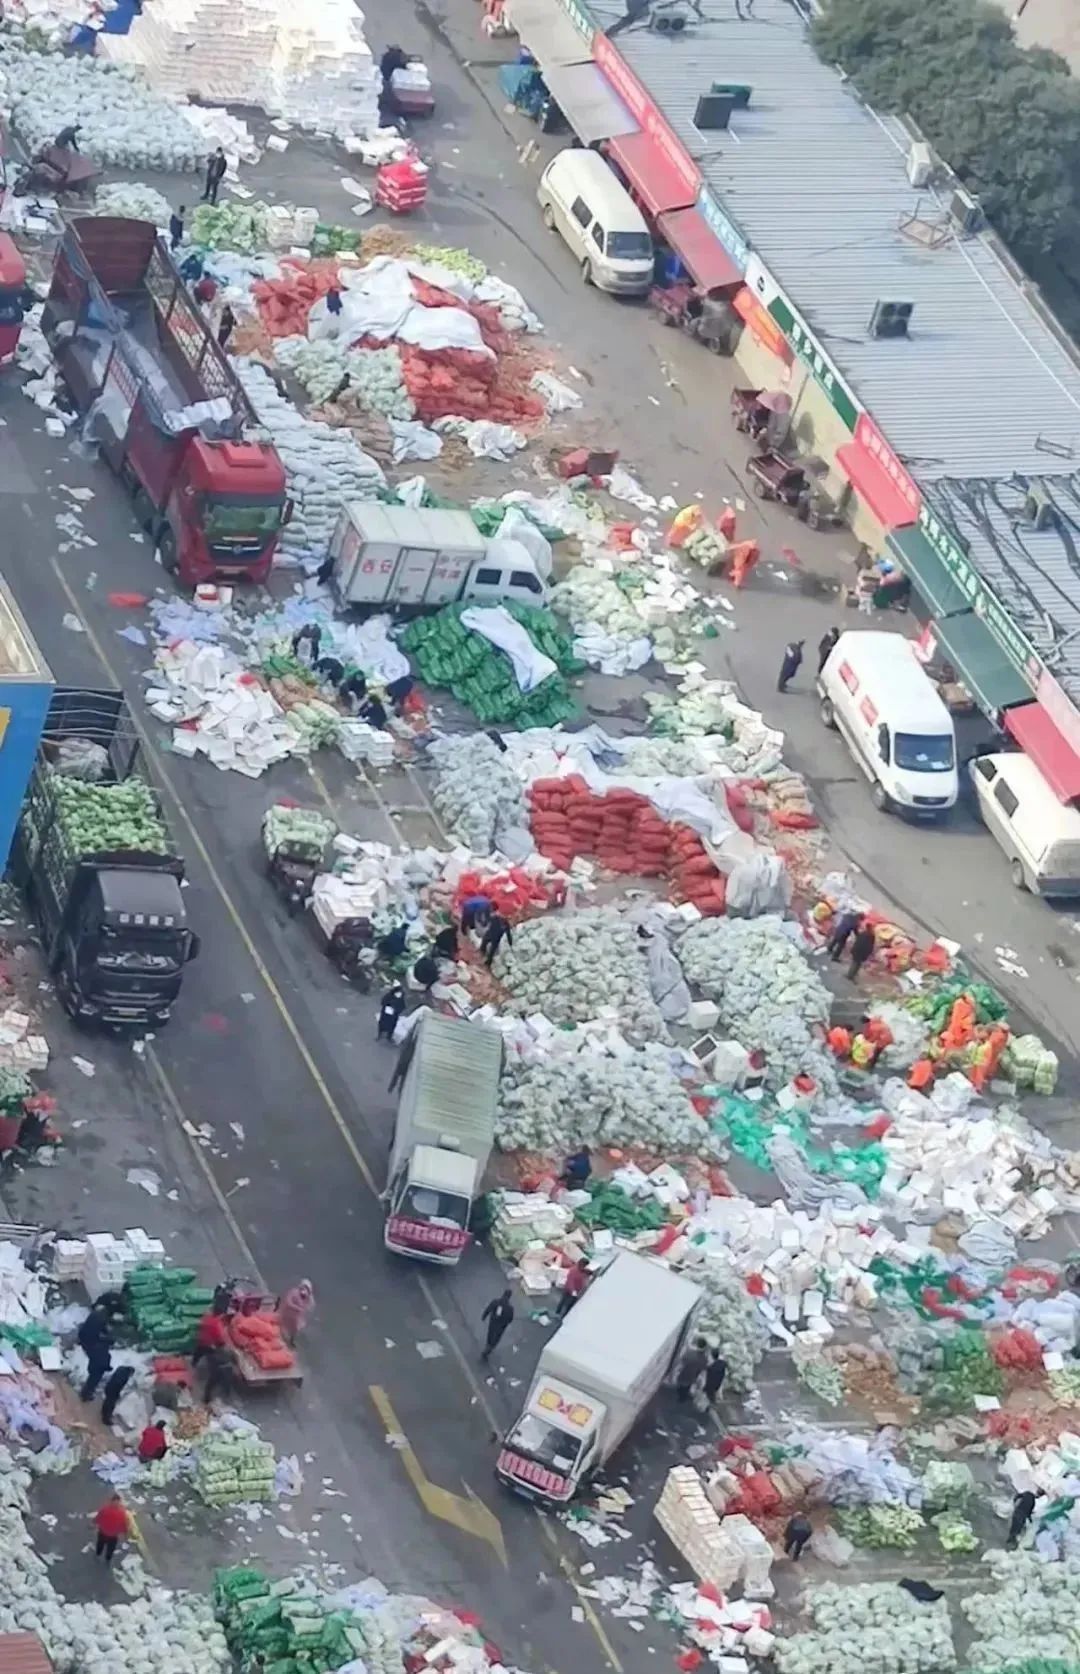  Trucks and bags of produce choke the streets of Xi'an during lockdown.